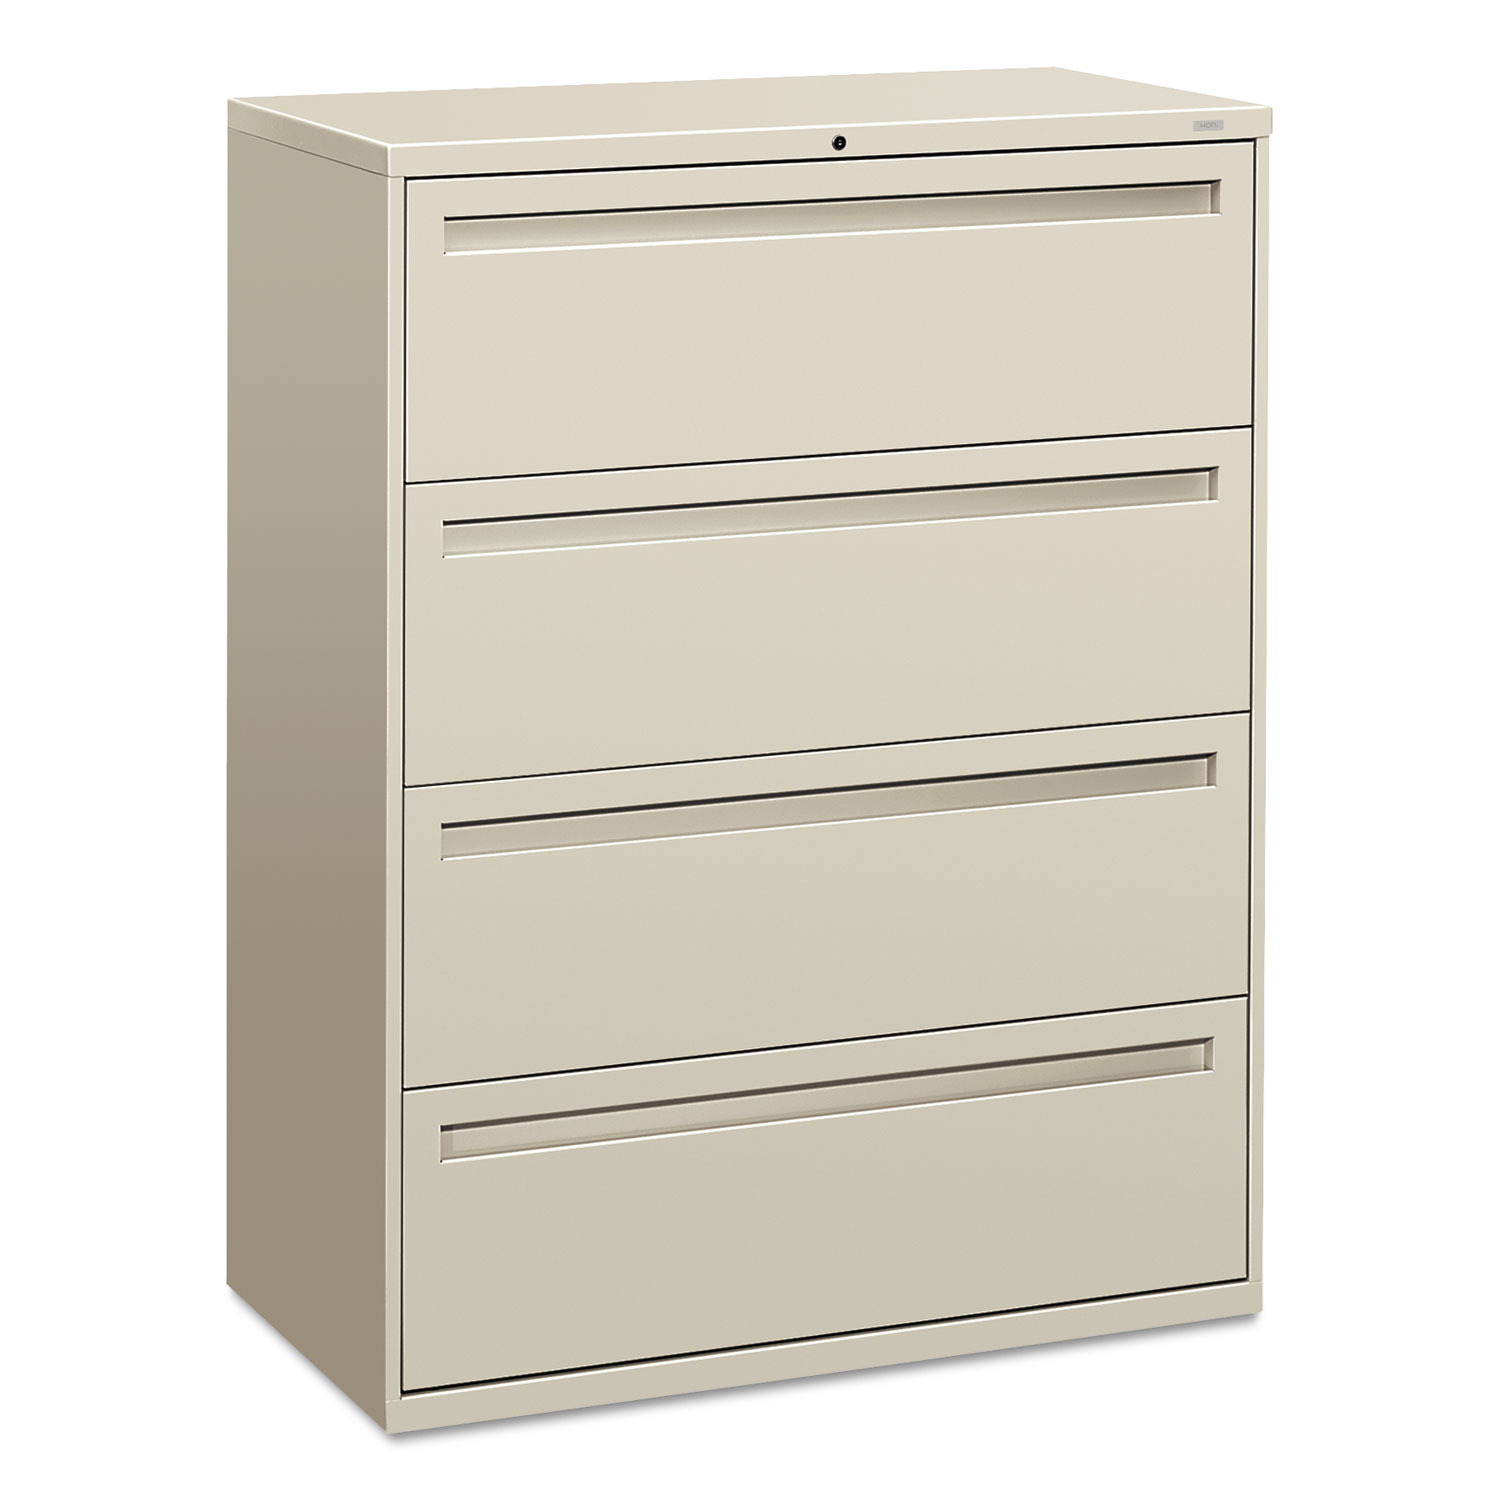 700 Series Four-Drawer Lateral File, 42w x 18d x 52 1/2h, Light Gray